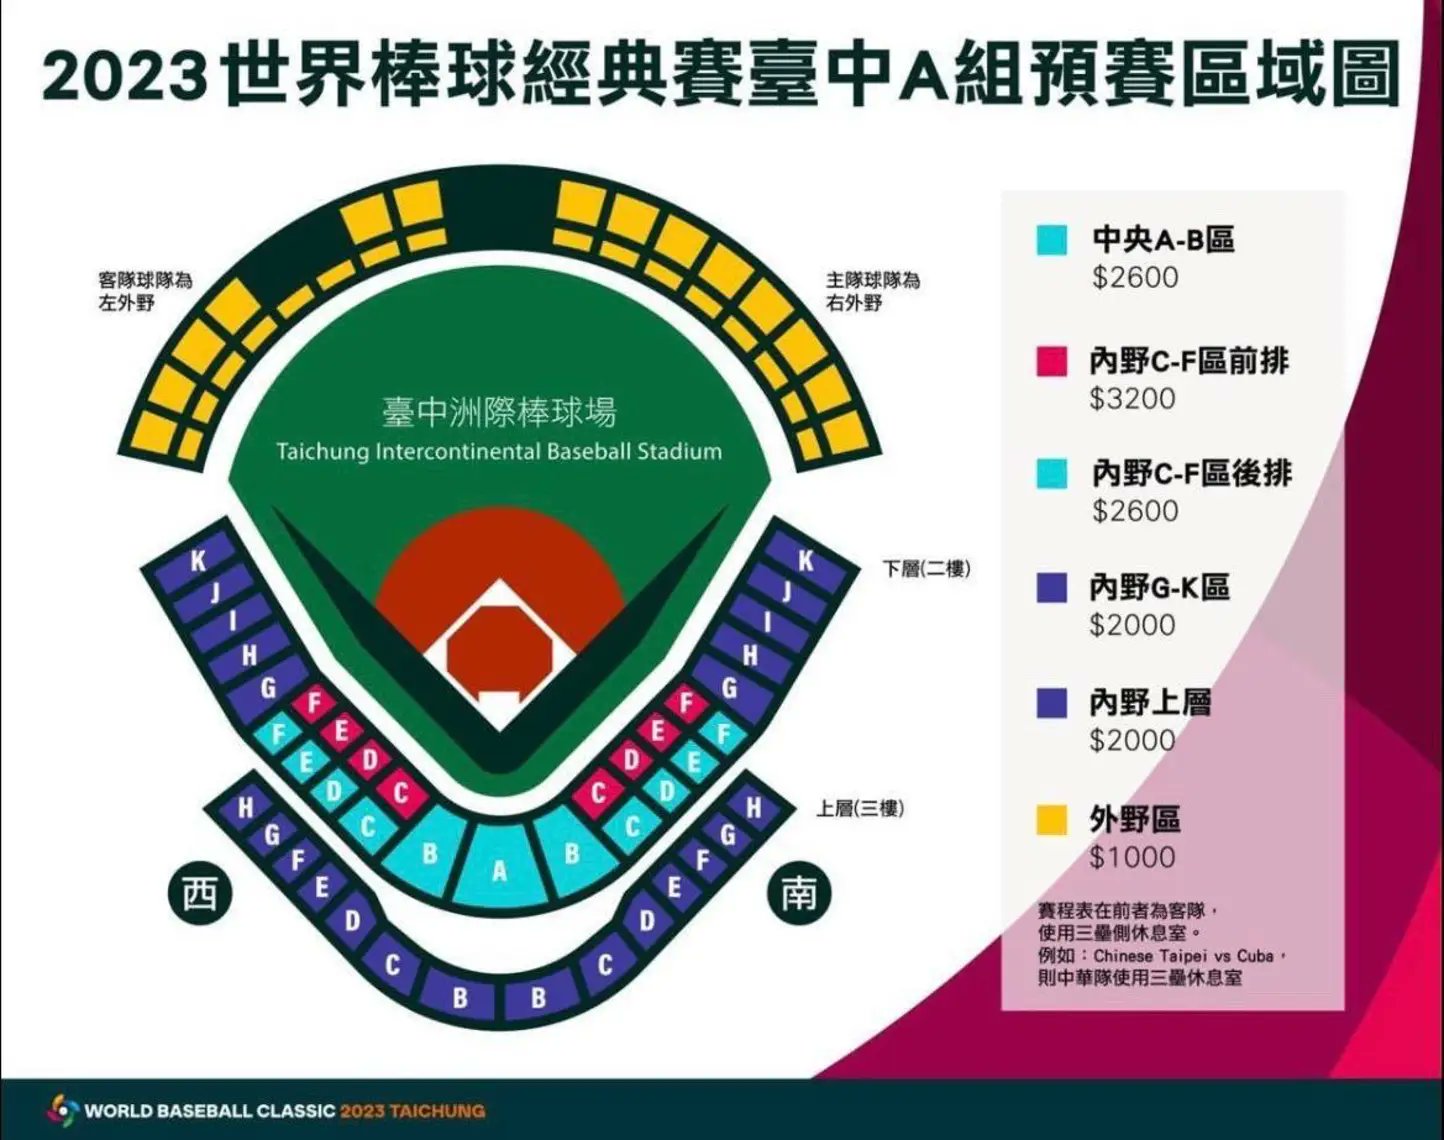 CPBL - ♥️ #95, Mina on Twitter: "Ticket Prices for 2023 World Baseball Classic Pool (Team Taiwan's Games). 🟥 3200 (~ 107 USD) 🟦 2600 NTD (~ 87 USD)